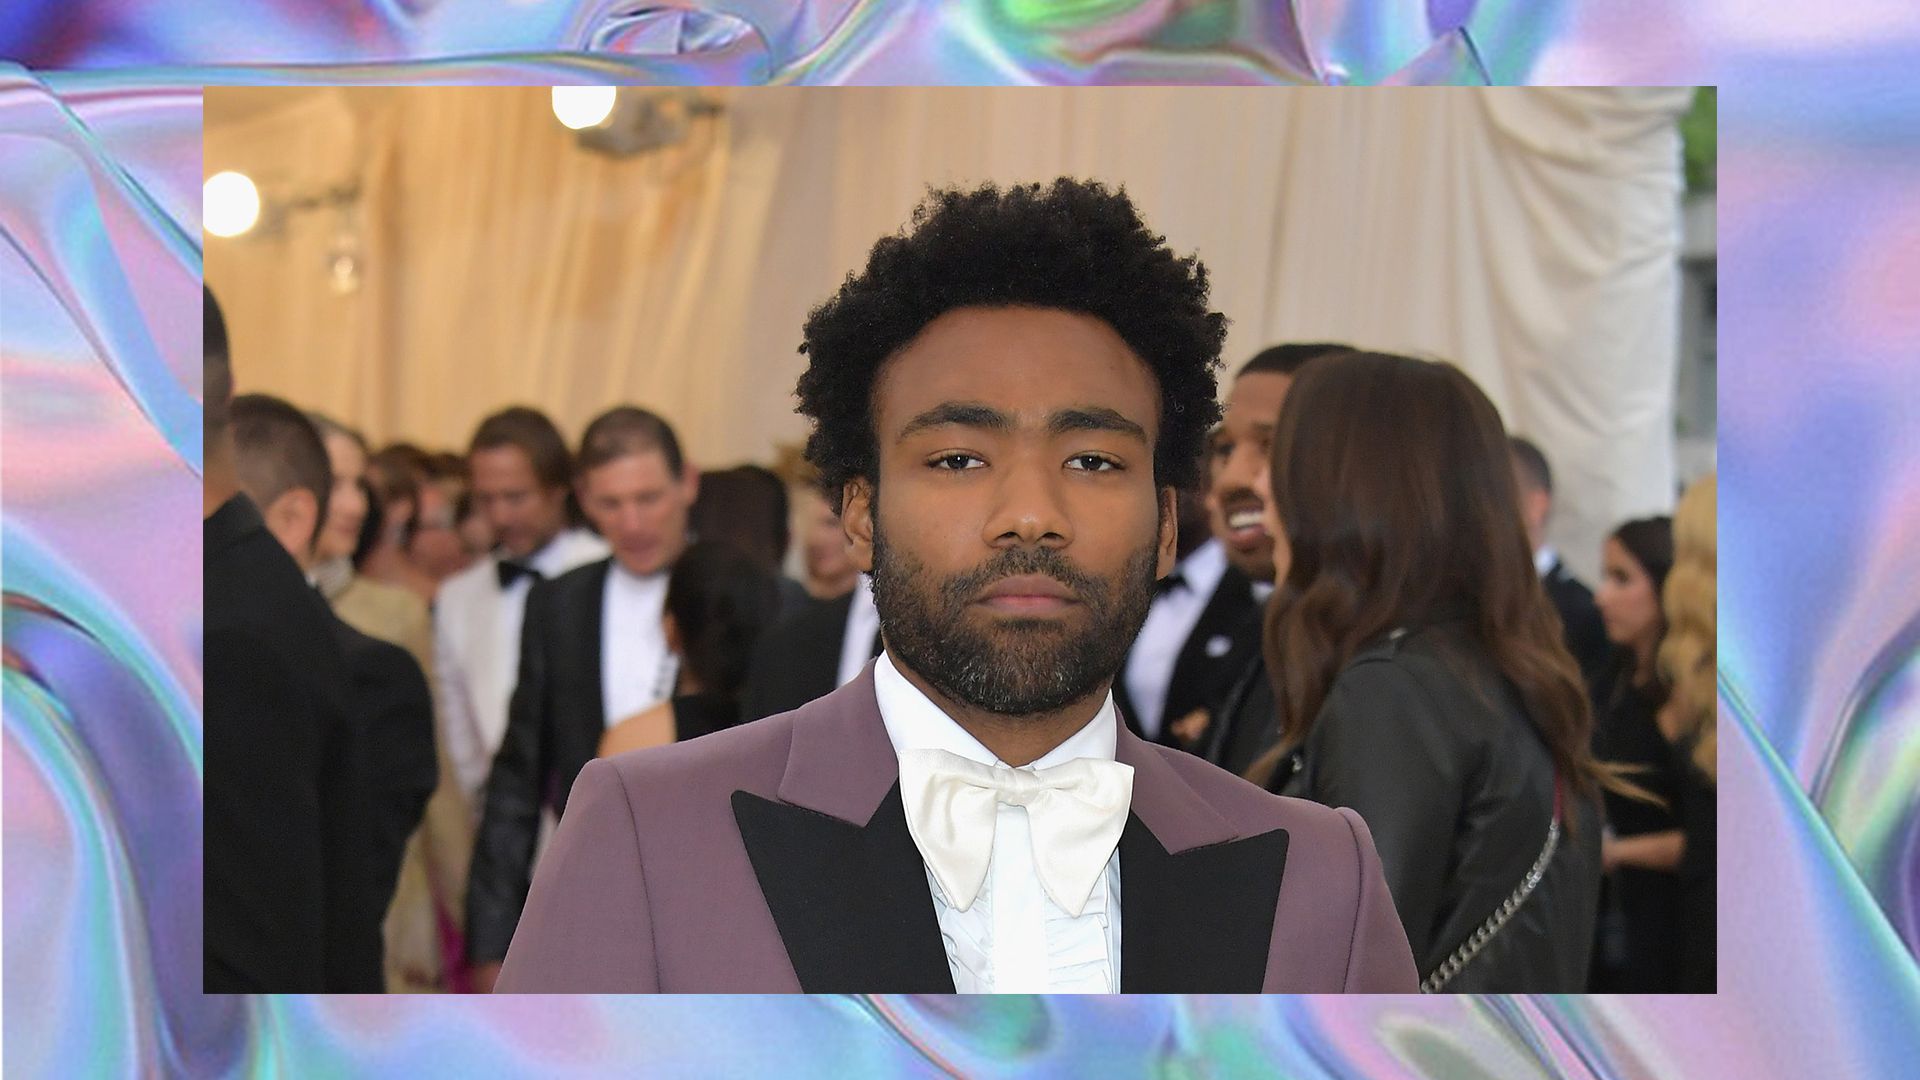 Donald Glover's Met Gala 2018 hair had a subtle but powerful message